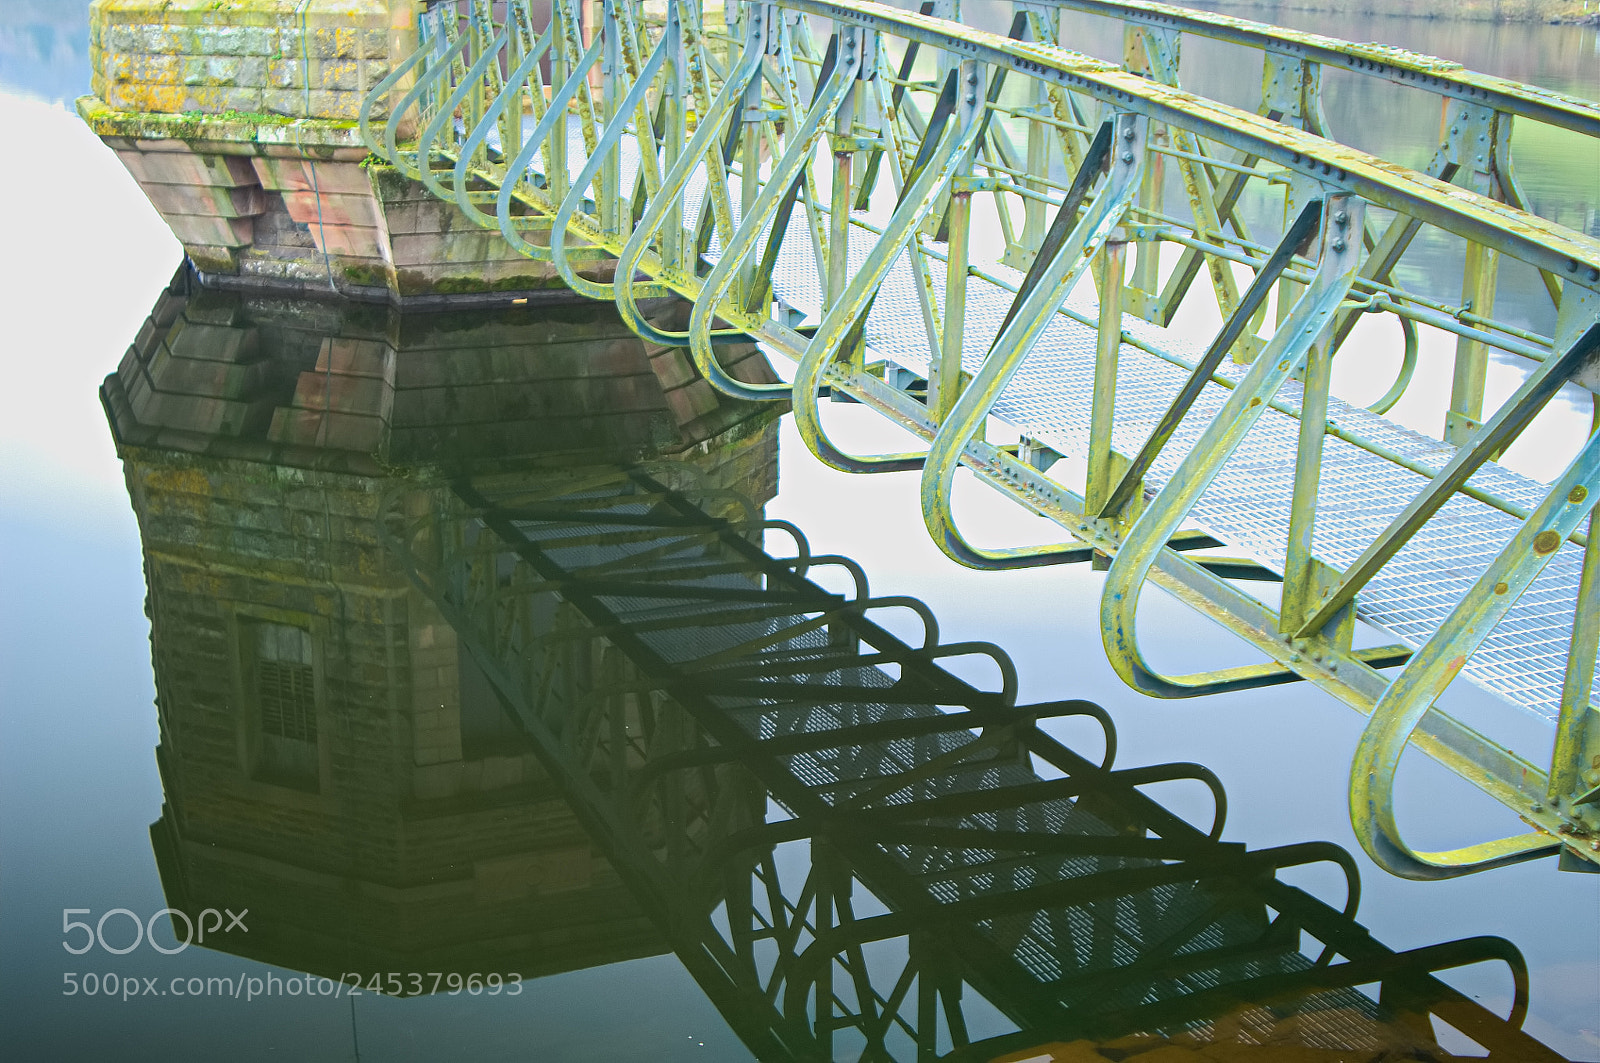 Nikon D2X sample photo. Pump house in reflection photography